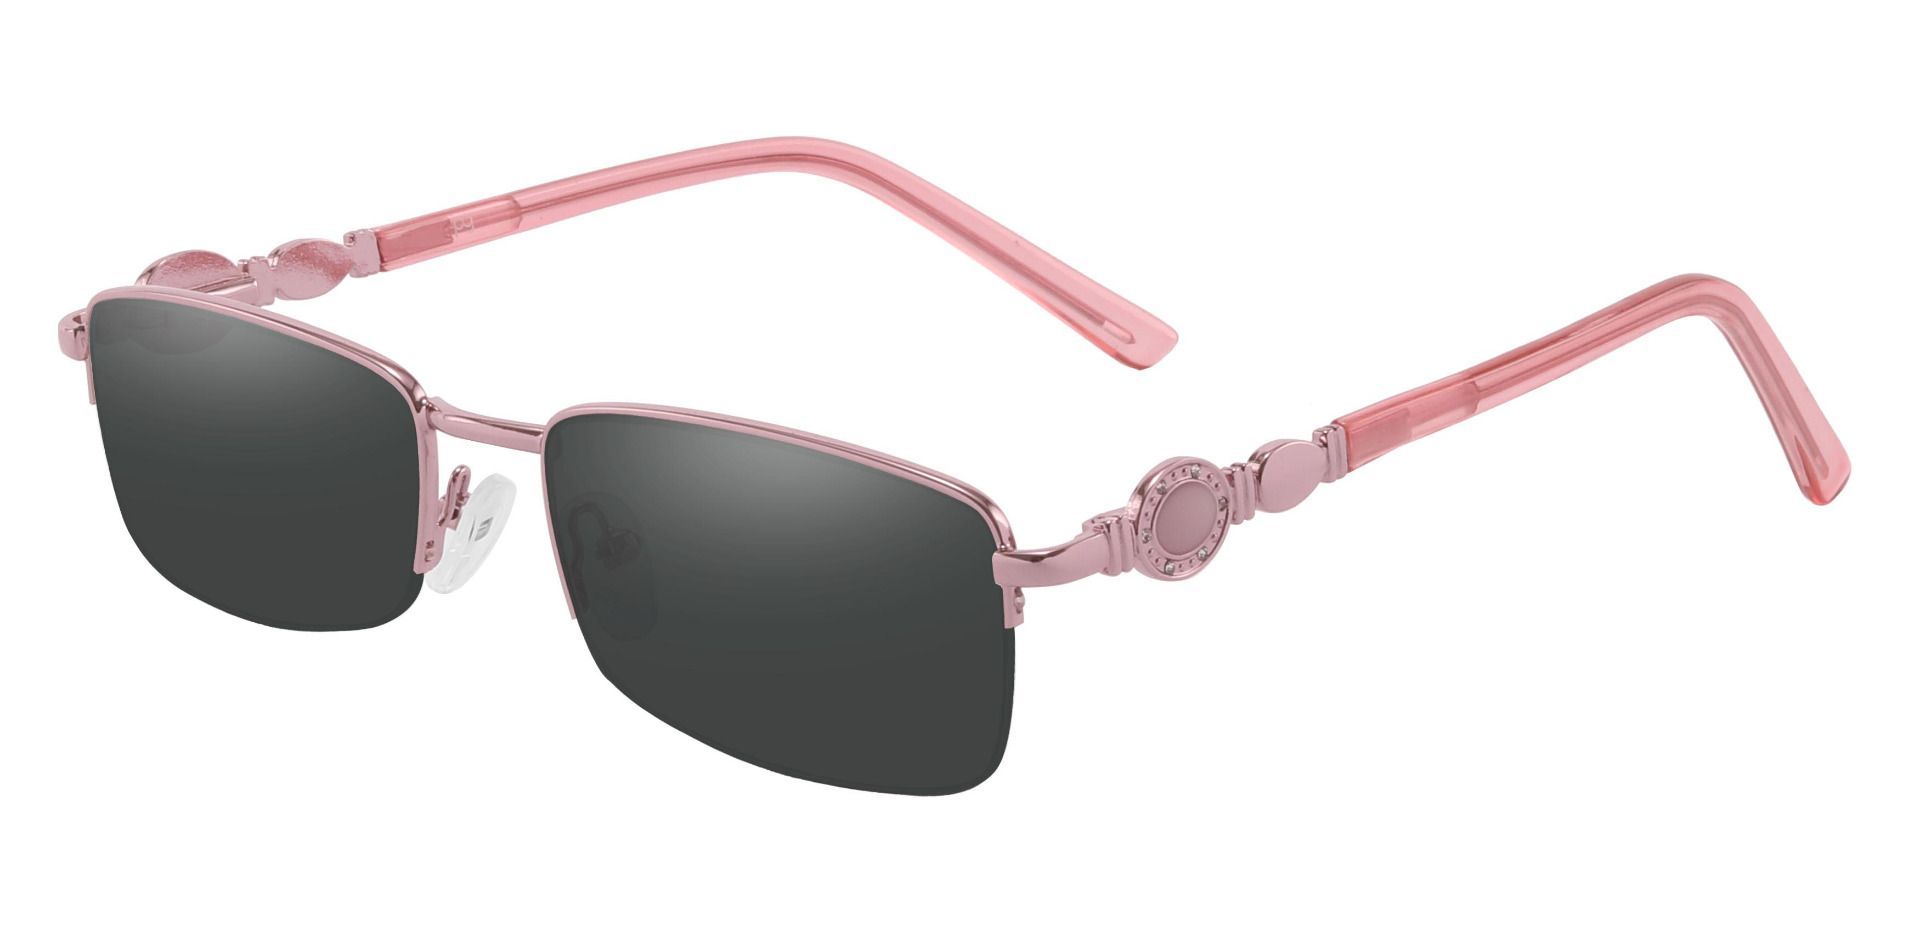 Crowley Rectangle Progressive Sunglasses - Pink Frame With Gray Lenses